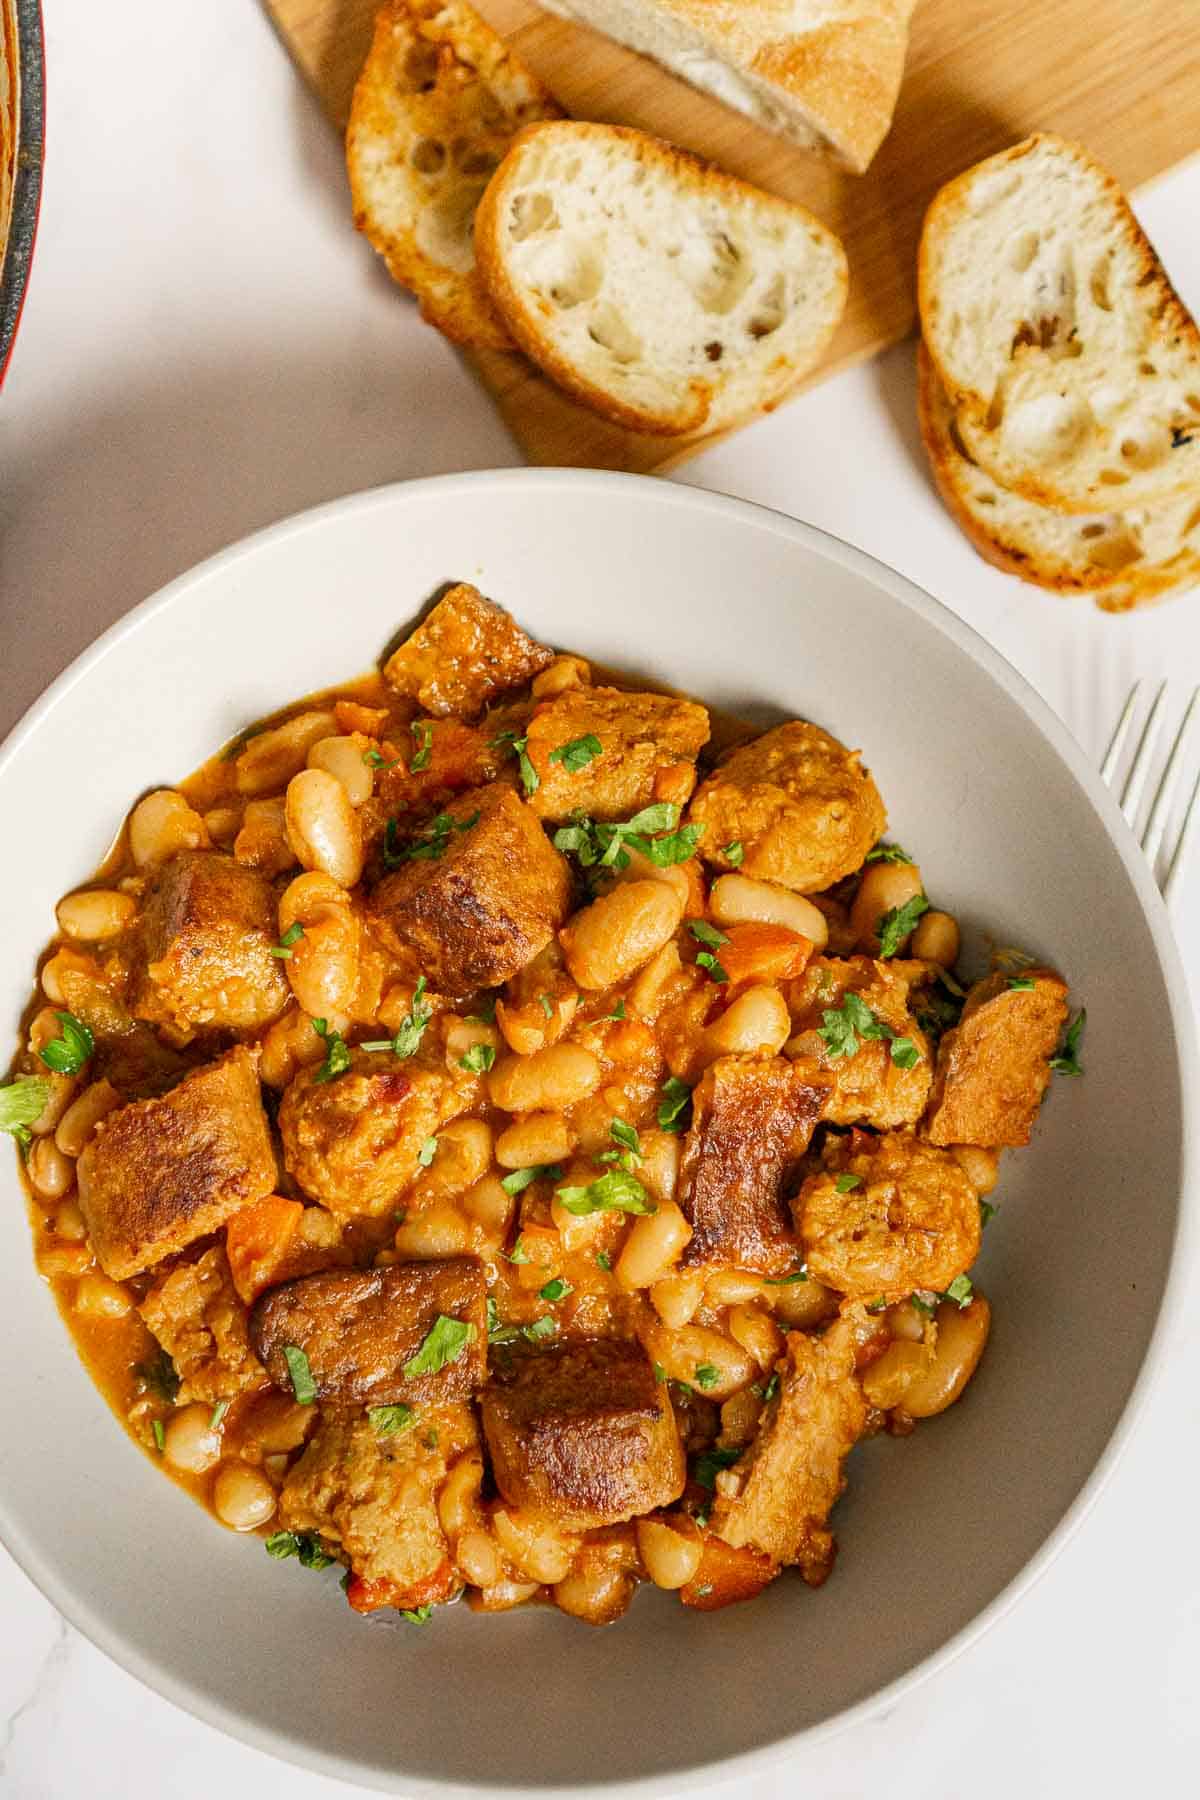 Bowl of vegan sausage stew with toasted baguette.